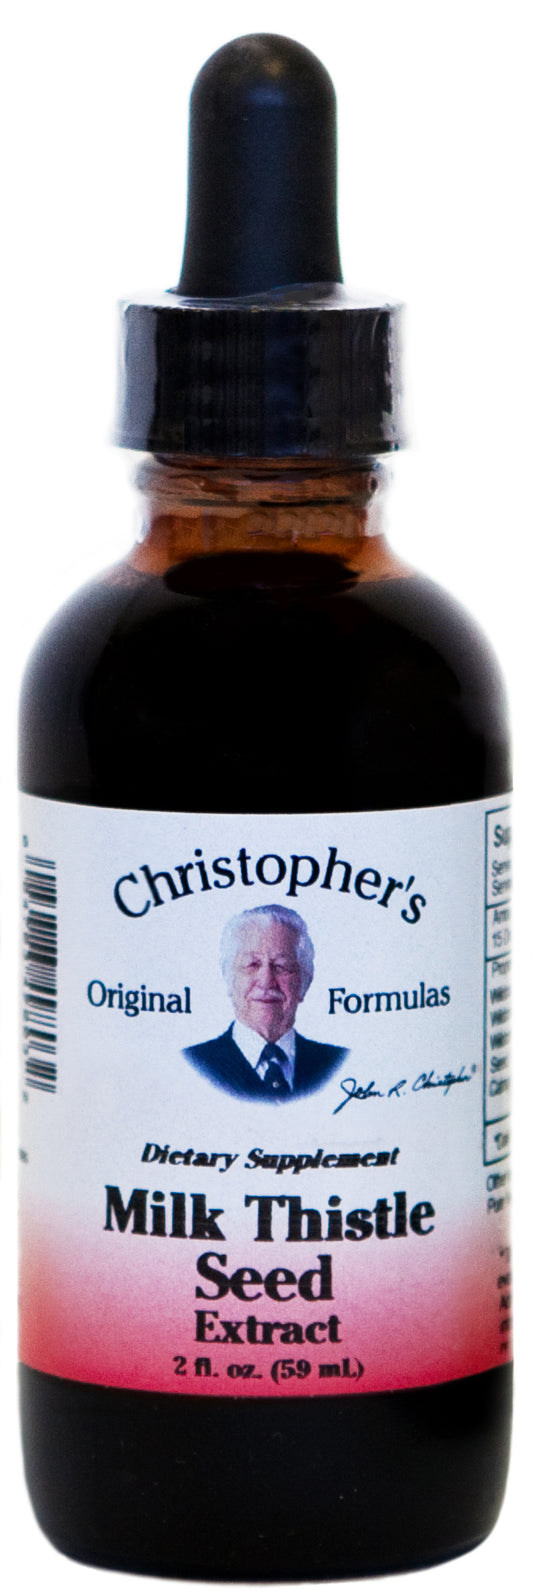 Dr. Christopher's Milk Thistle Seed Glycerine Extract